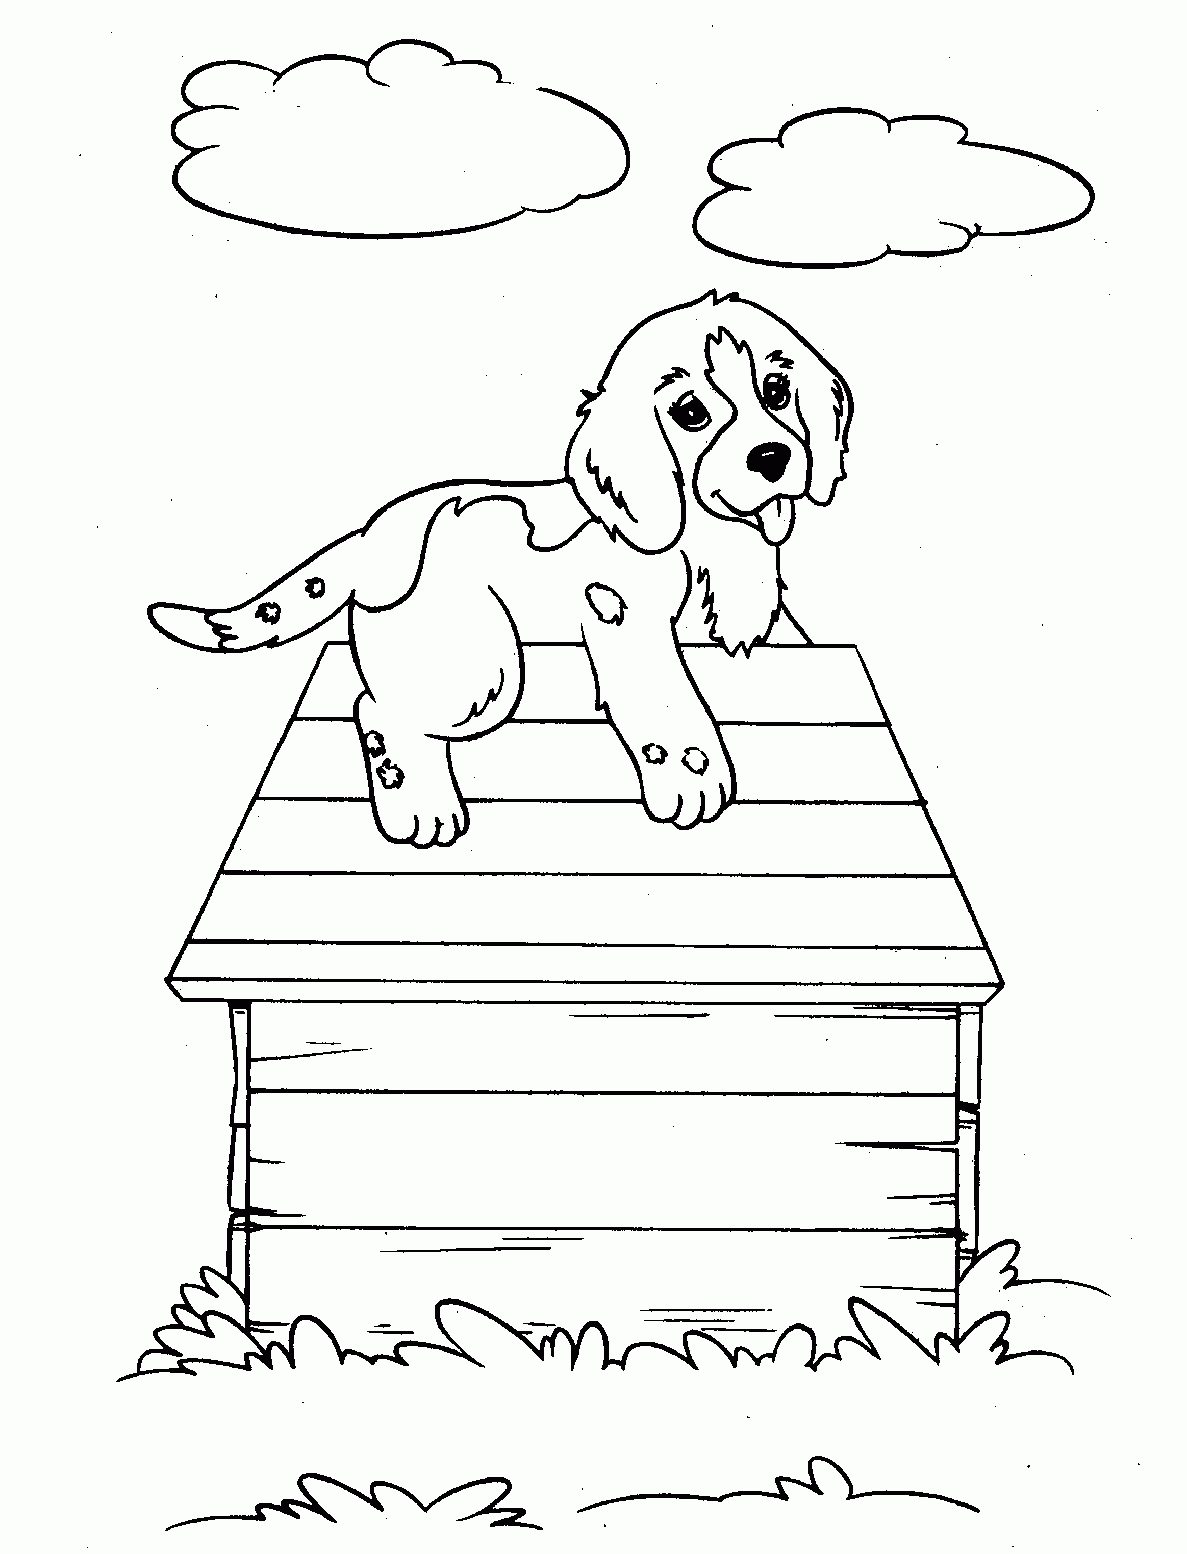 Free Printable Dog Coloring Pages For Kids Find Creative Coloring - Free Printable Dog Coloring Pages